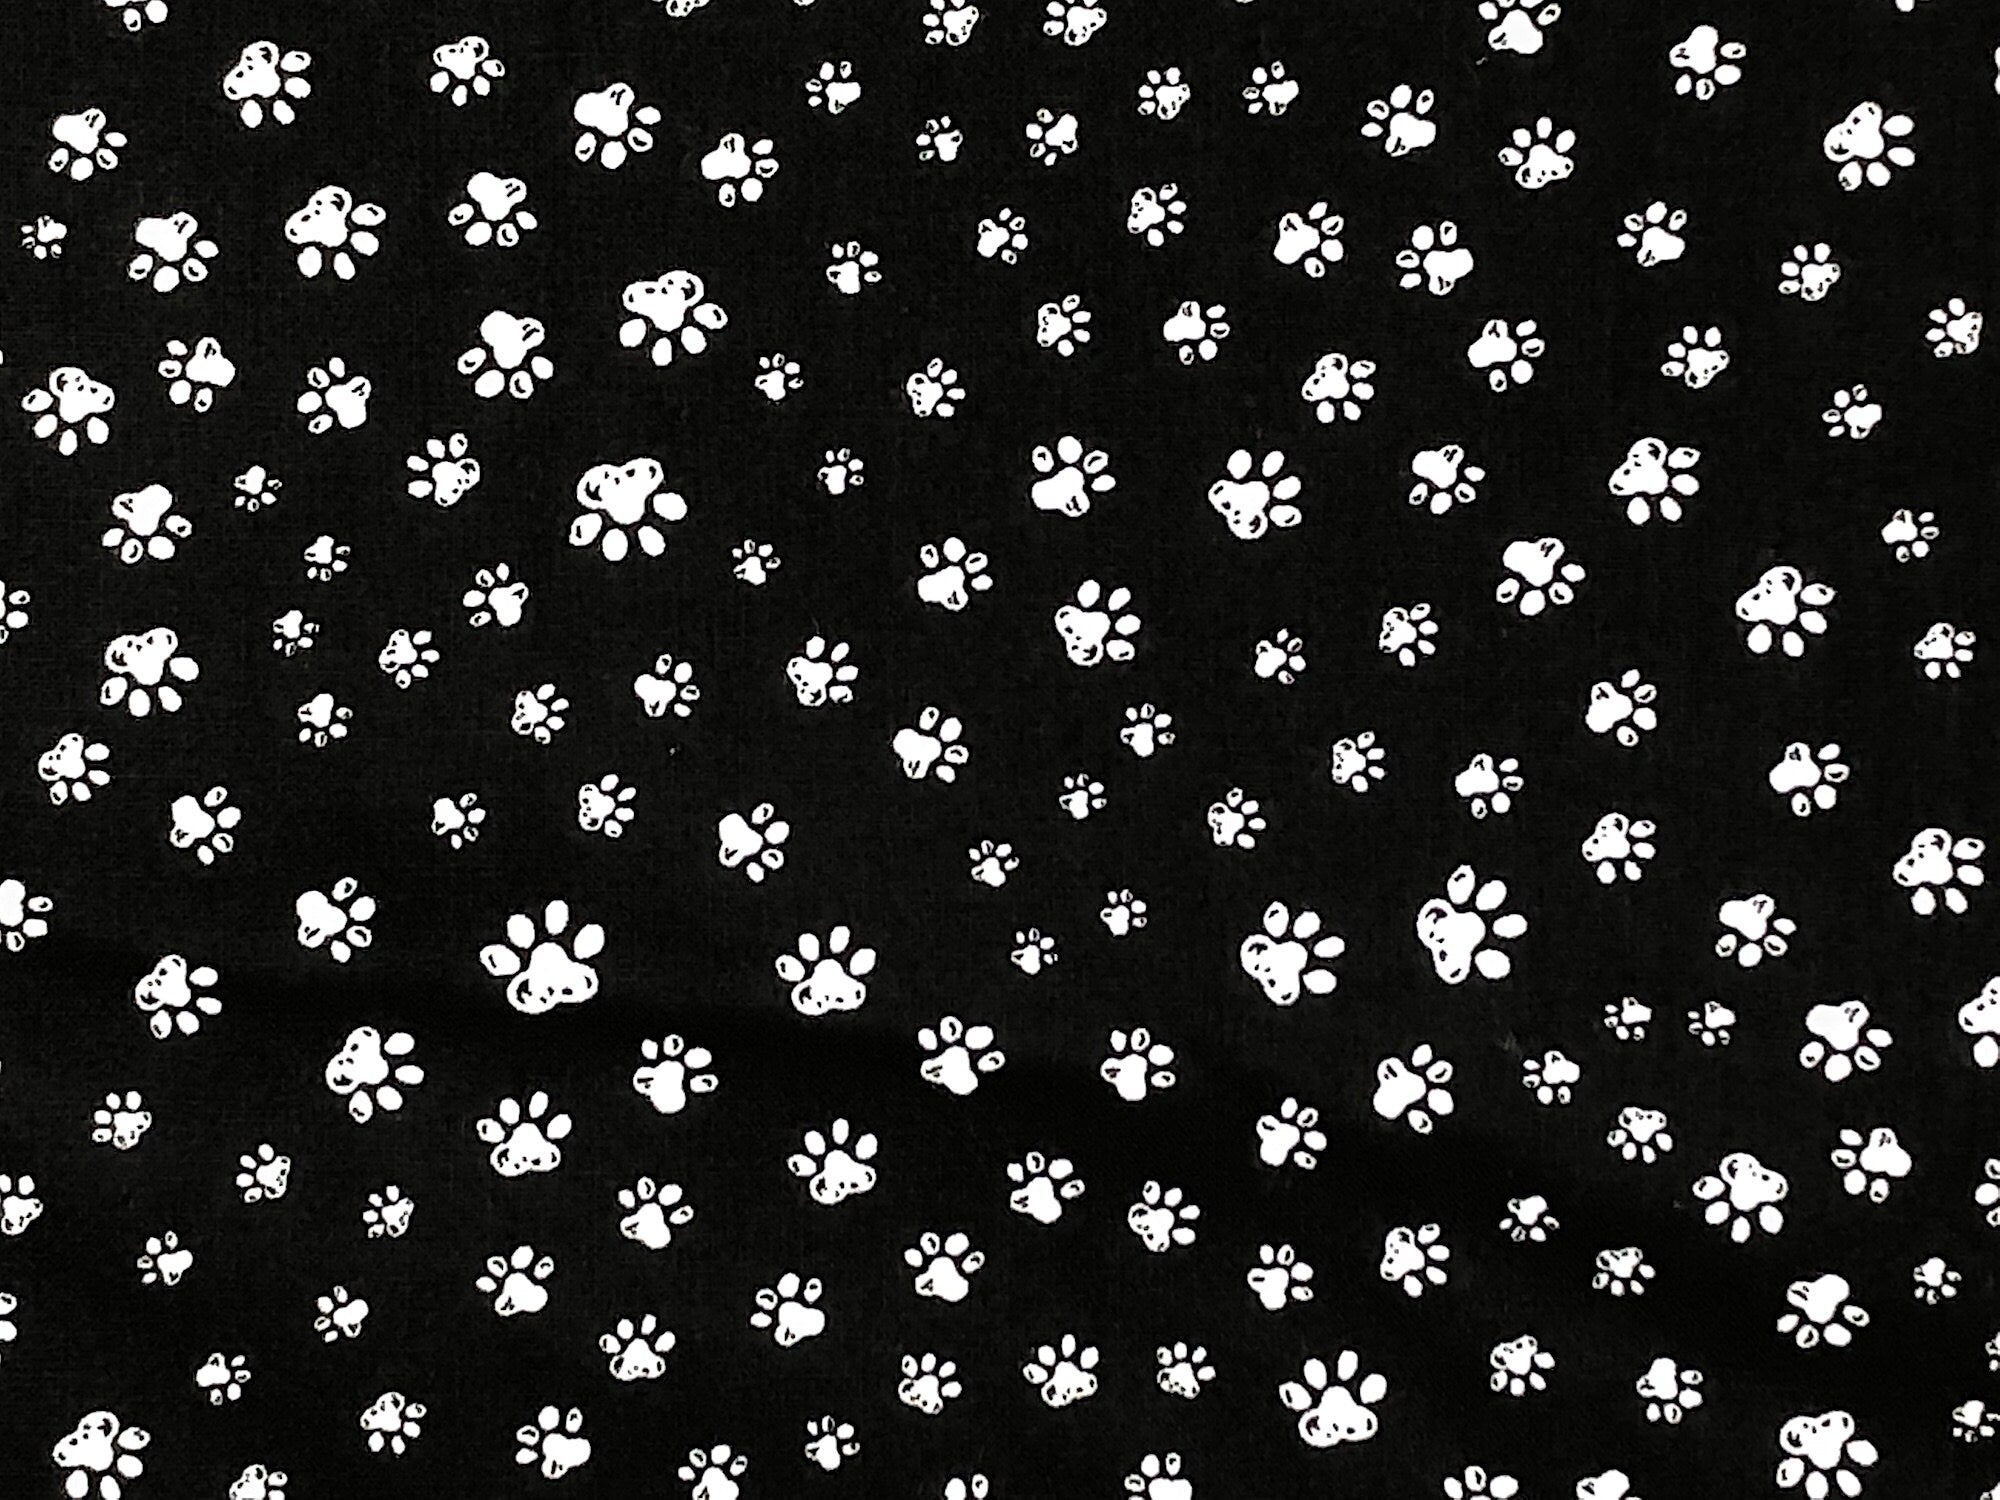 Close up of white paw prints on a black background.